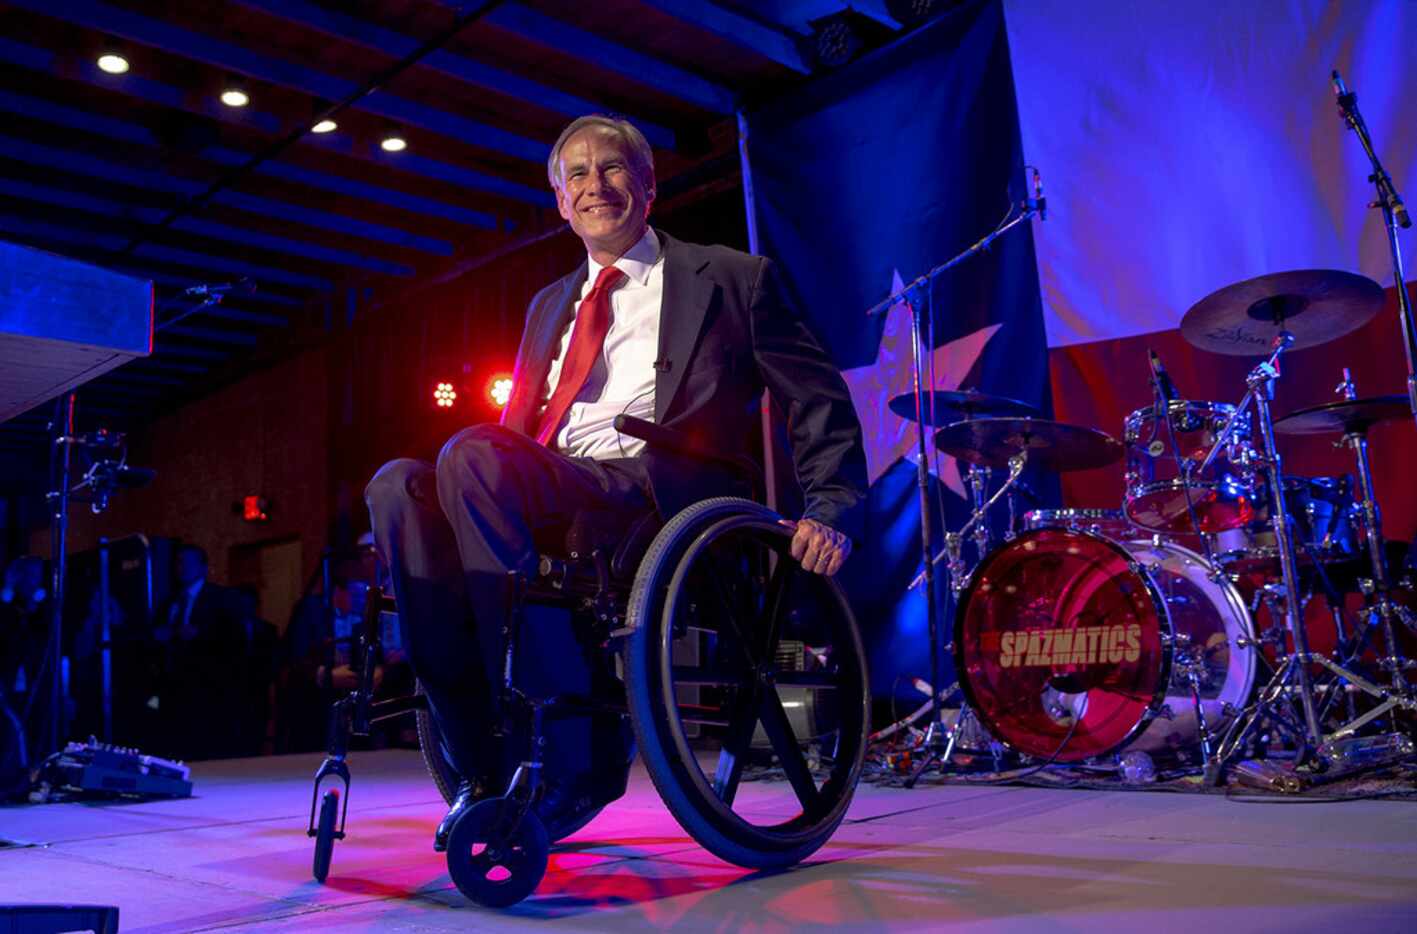 Texas Gov. Greg Abbott appears in front of a crowd of supporters during the Texas GOP...